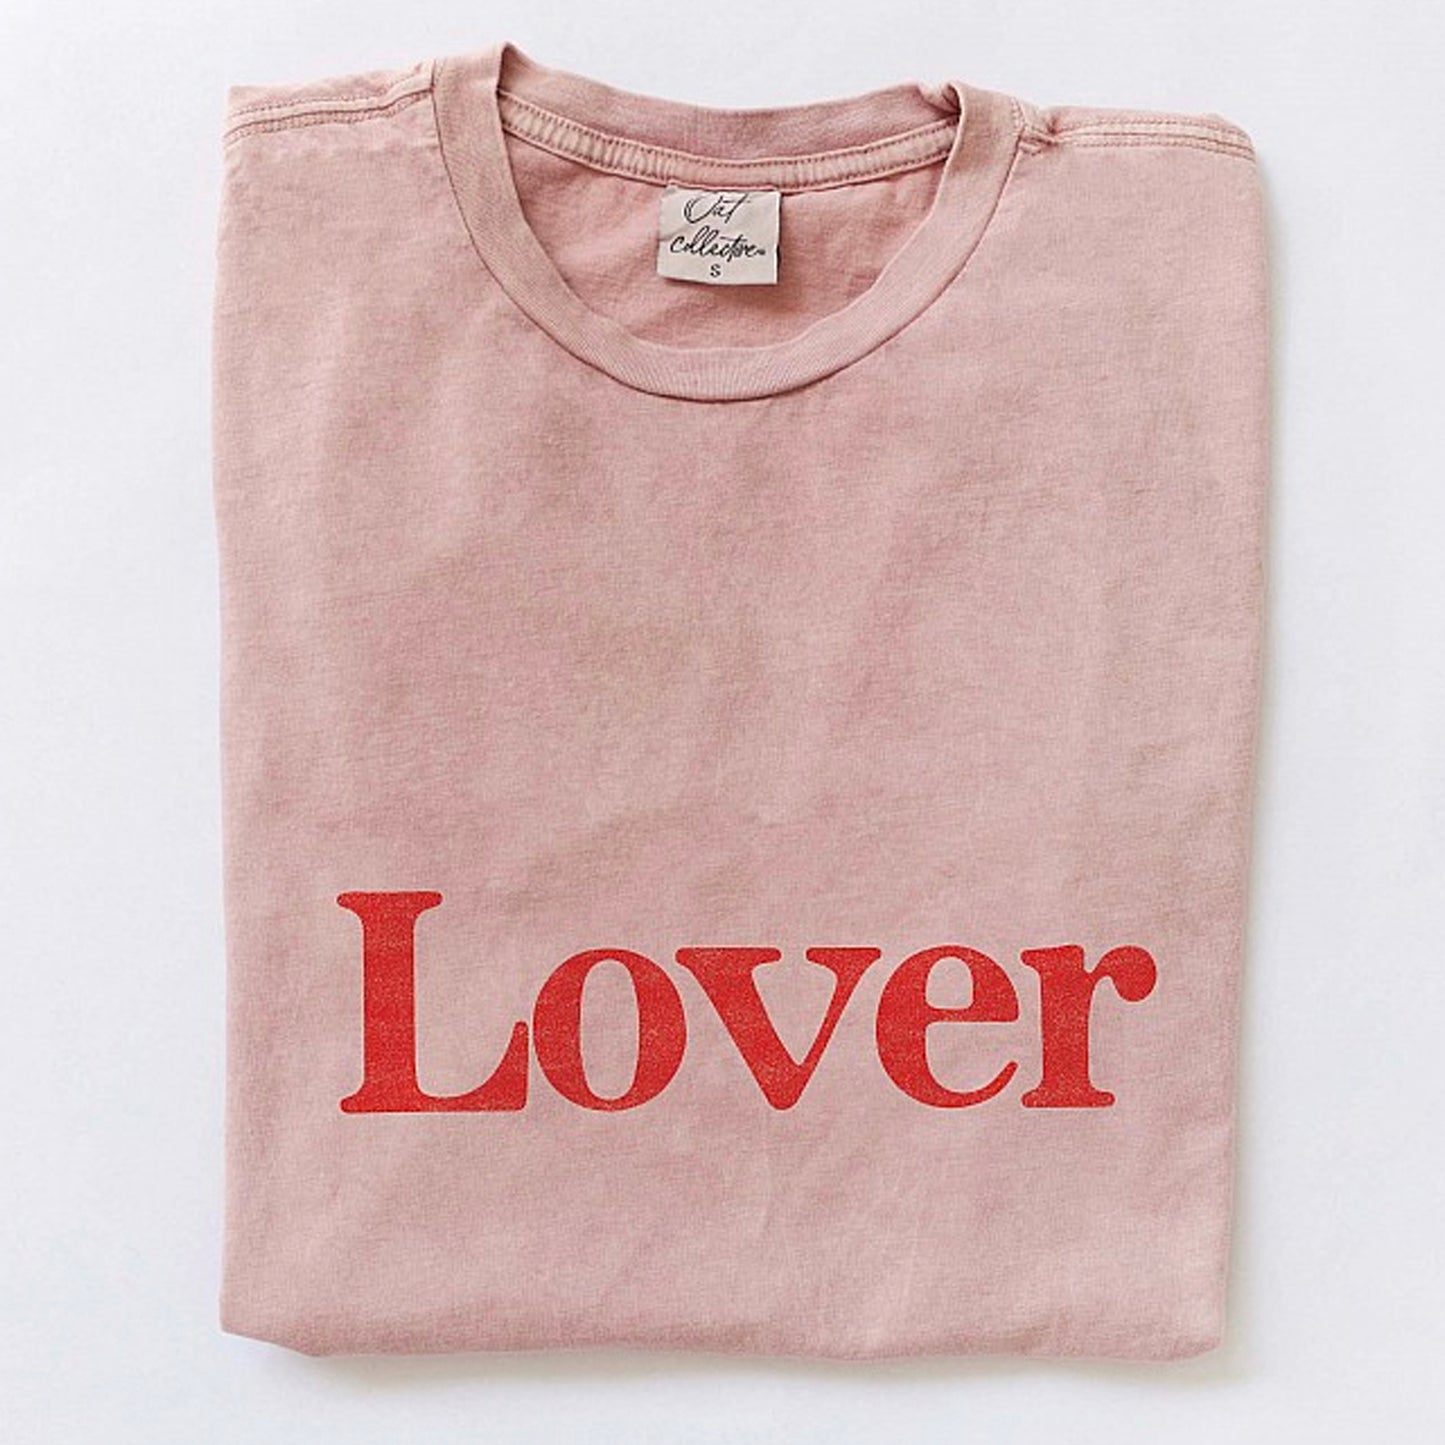 Lover Women's Graphic Tee, Soft Pink